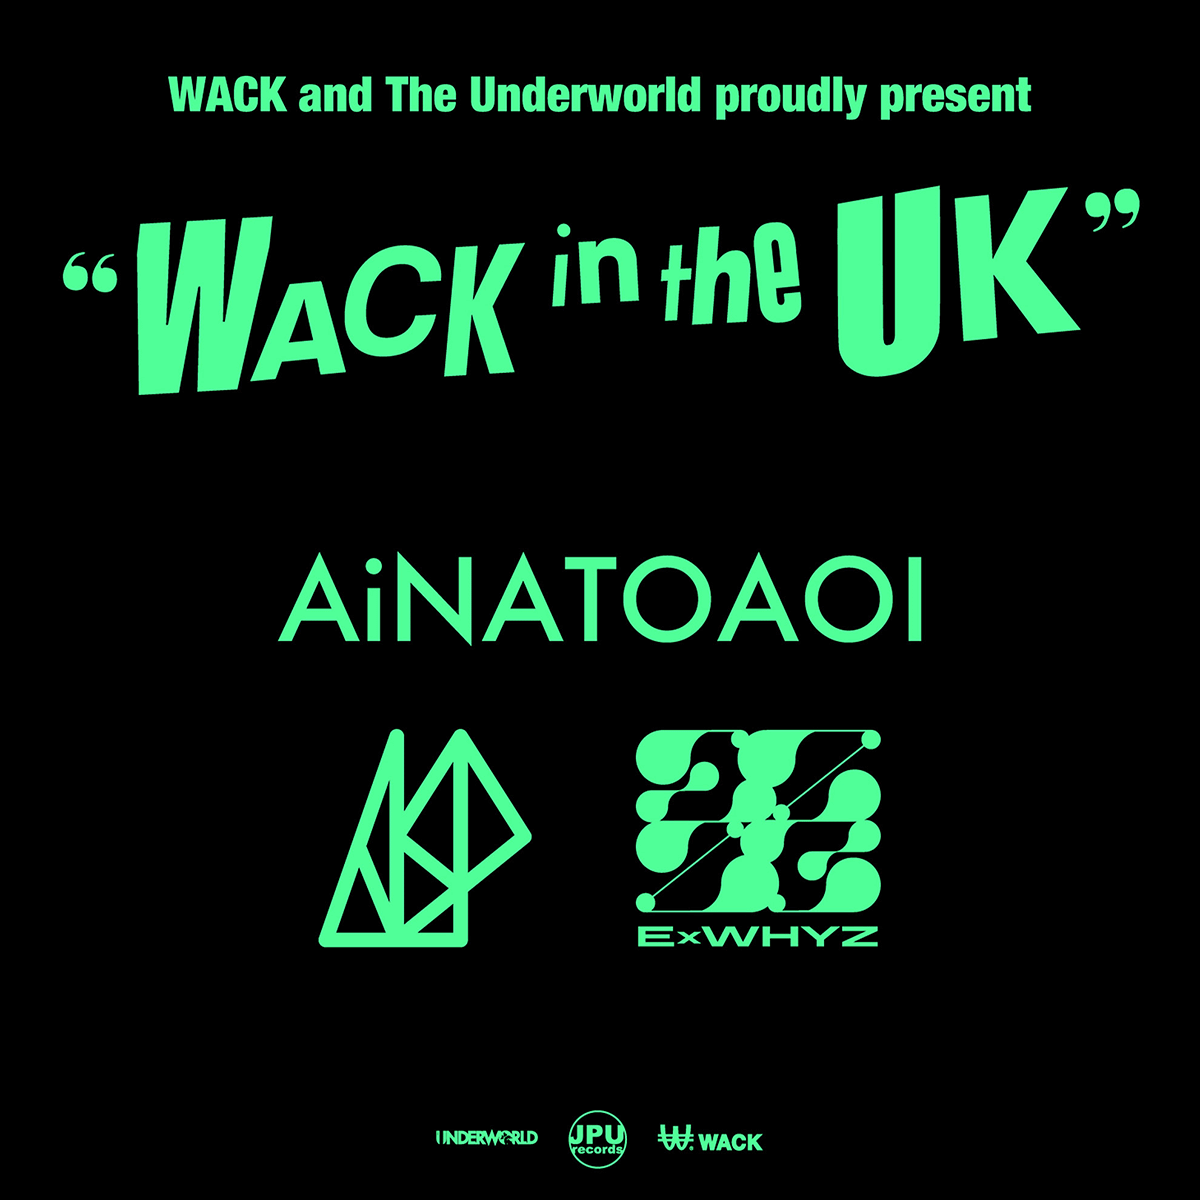 WACK in the UK at The Underworld in Camden, London. Featuring AiNATOAOI, ASP and ExWHYZ